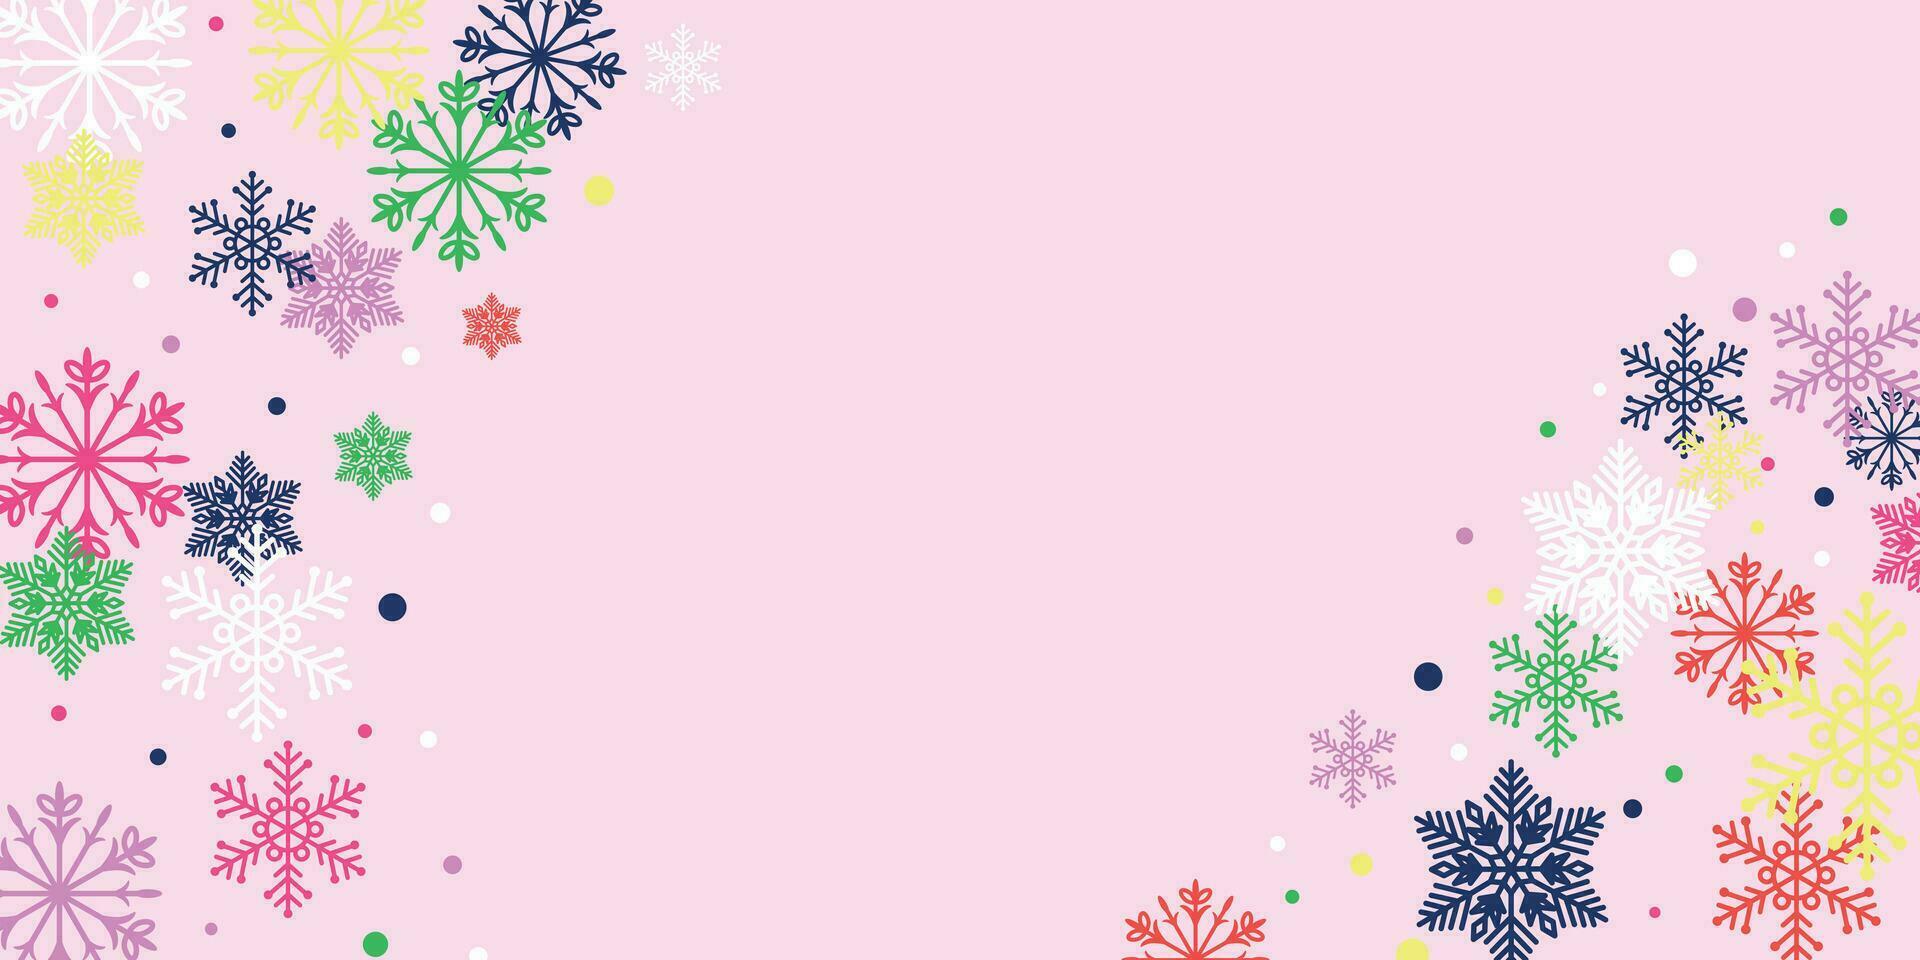 Bright snowy background. Festive New Year and Christmas background with multi-colored snowflakes. vector